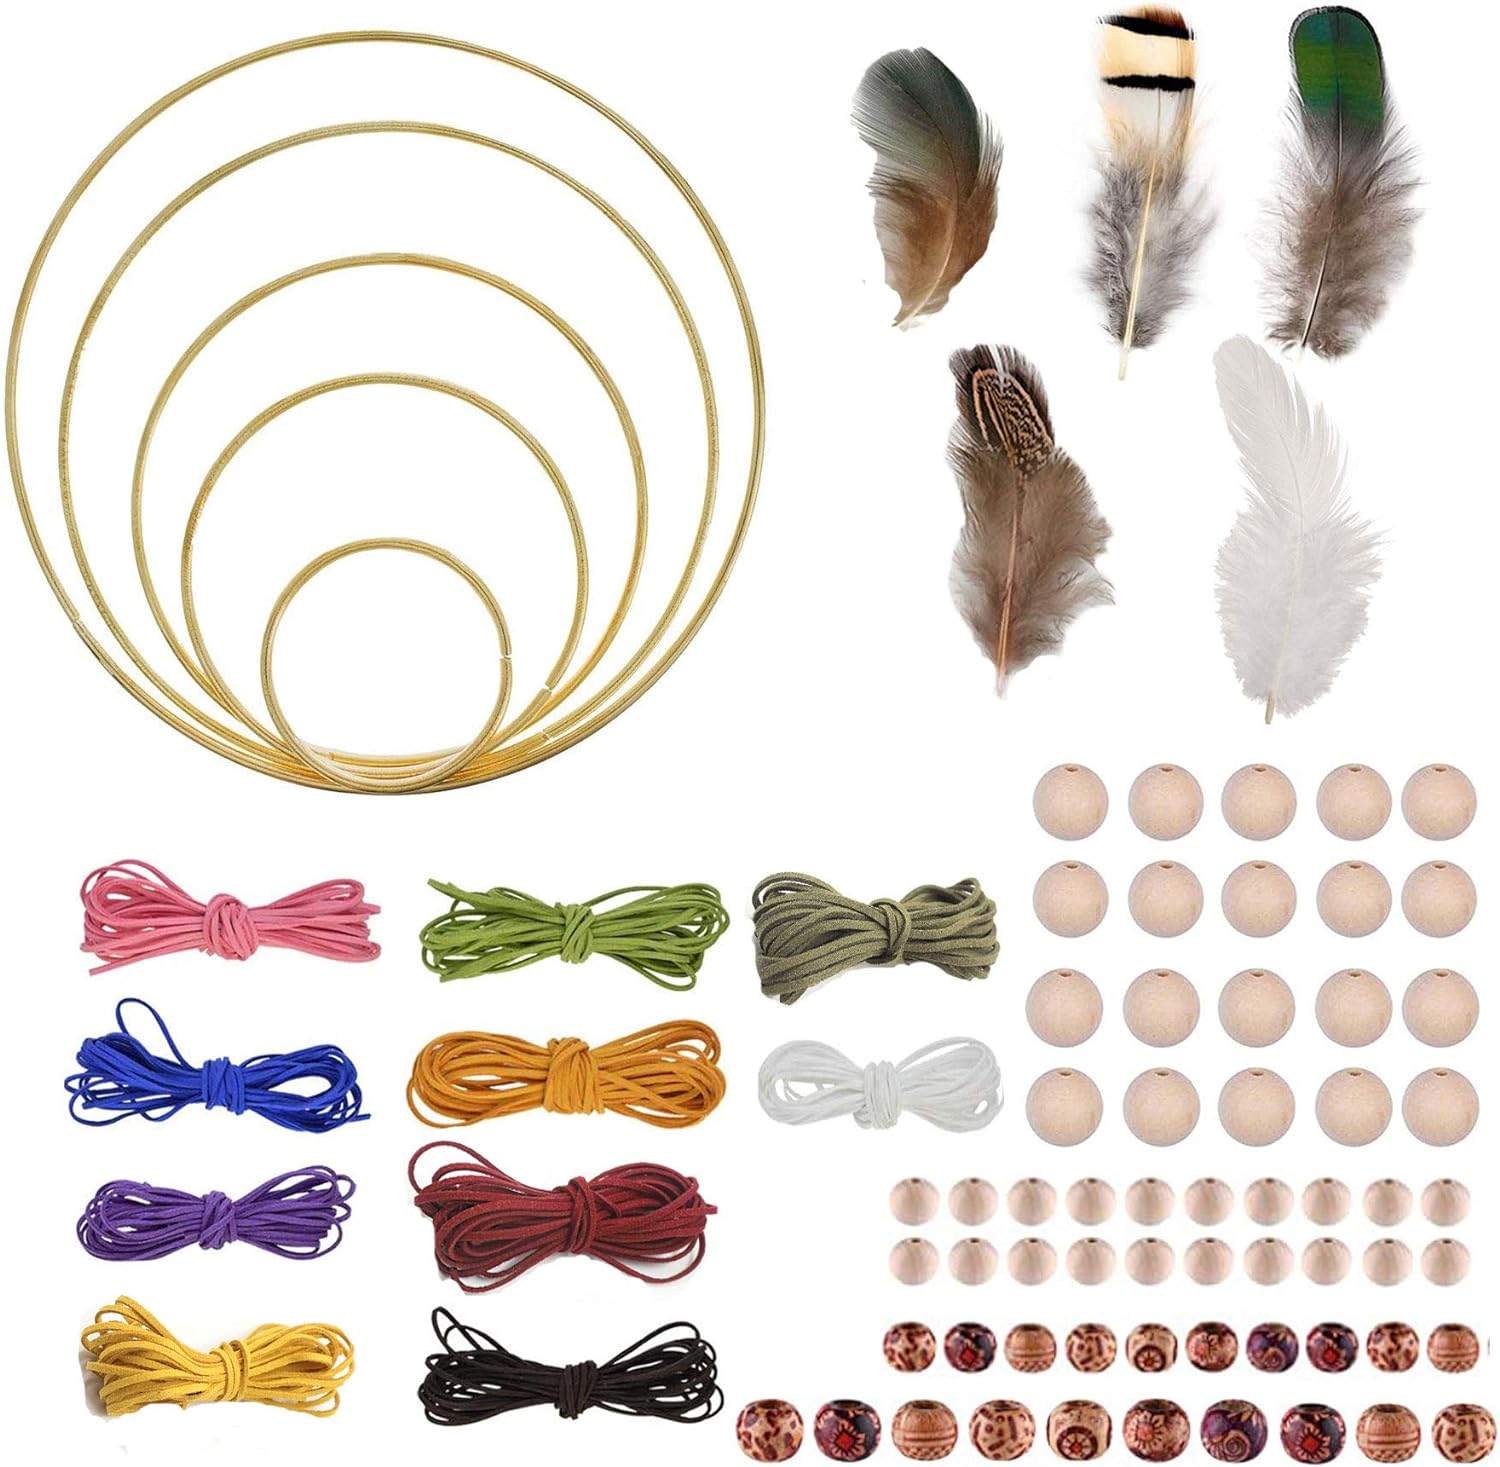 Diy Dream Catcher Kit, Dream Catcher Supplies Gywantt 5 Pcs Gold Metal Hoops in 5 Size 50pcs 5 Styled Feathers 10 Pcs 3 mm Faux Suede Cord with 5m Each Color 60 Pcs Wood Beads for Dream Catcher Crafts